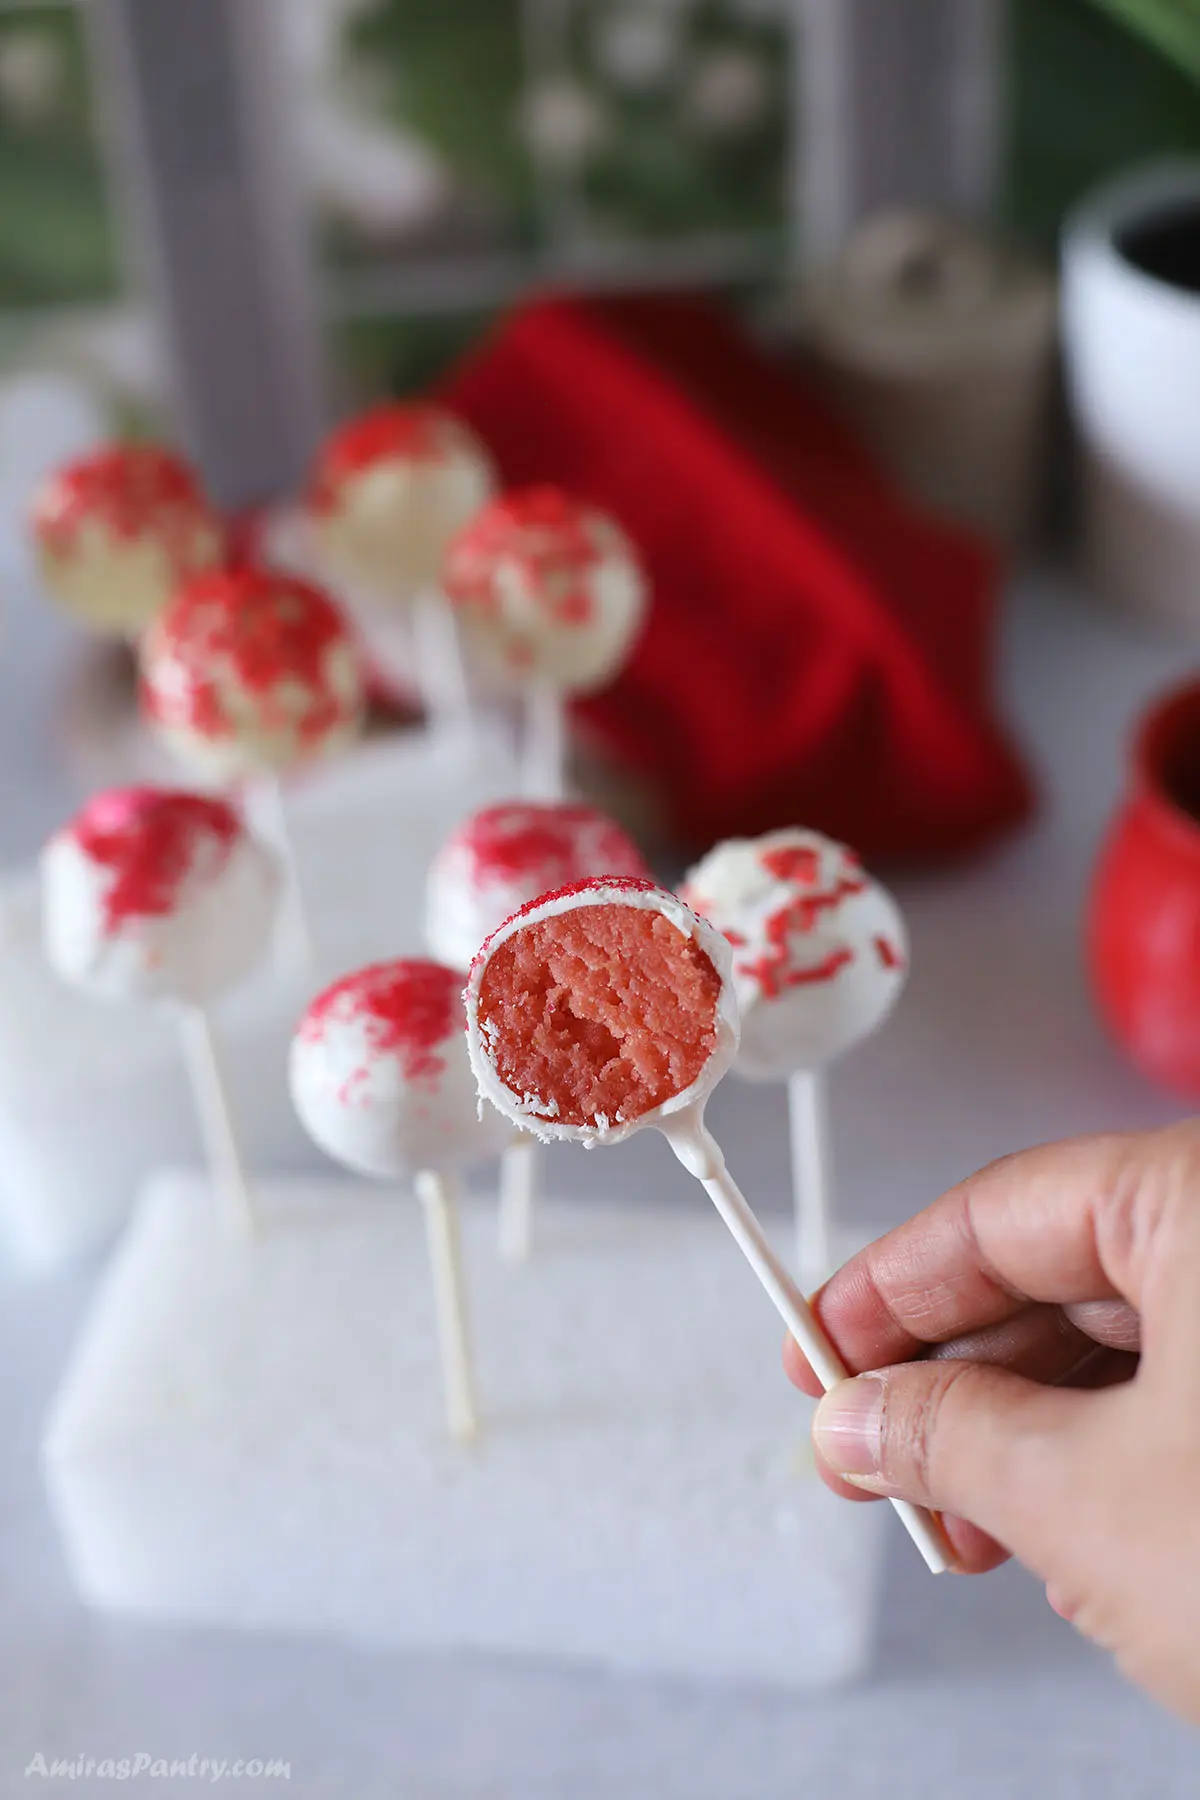 A hand holding one strawberry cake pops cut to show texture.